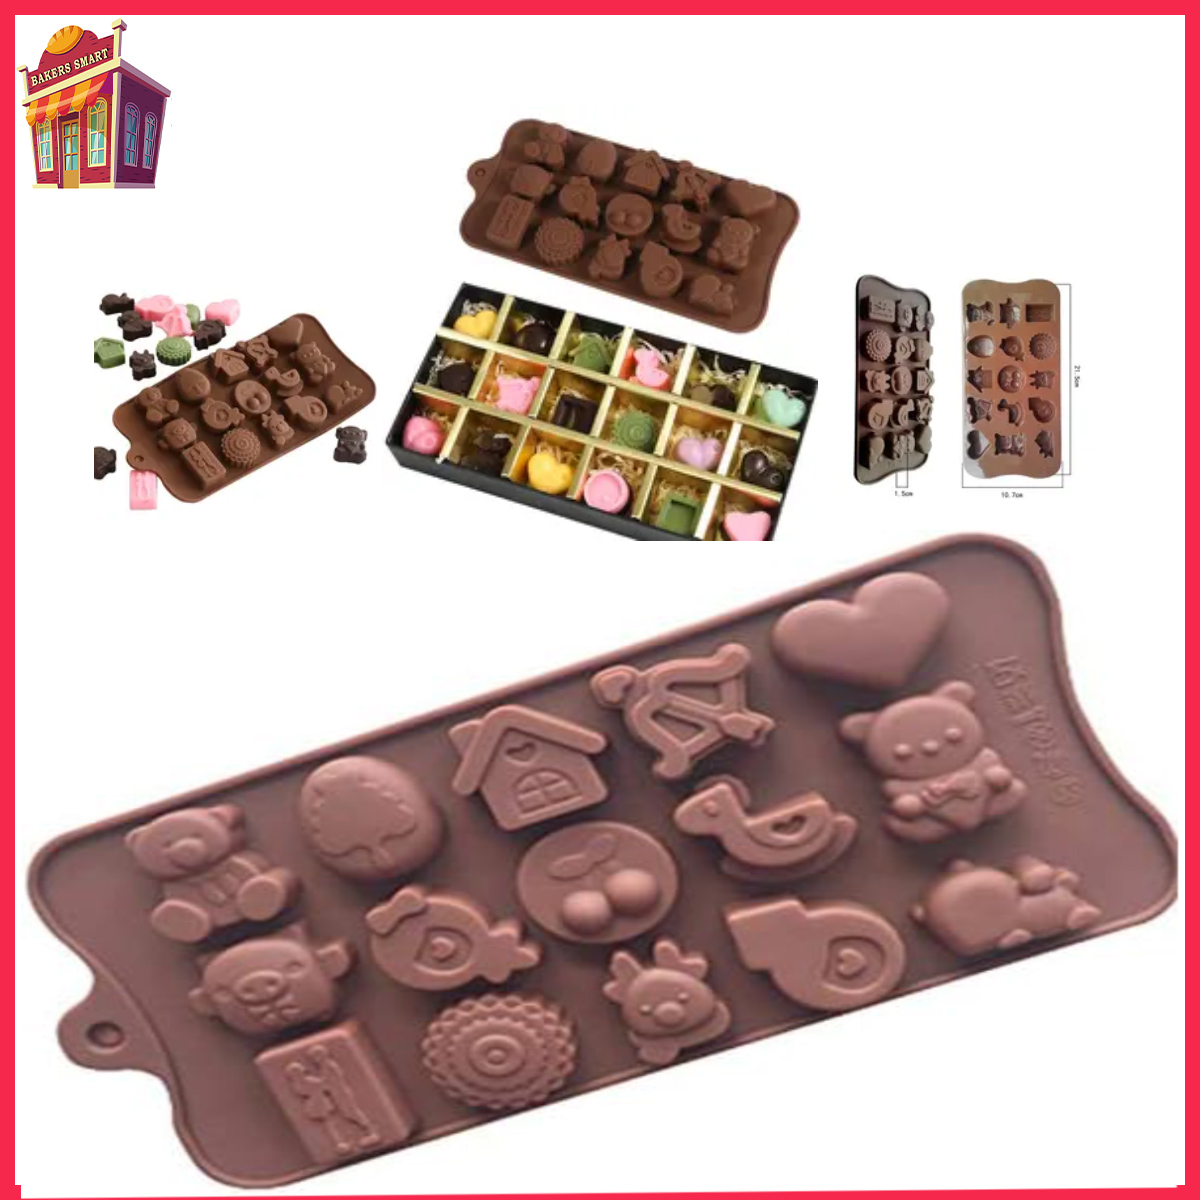 Freshware CB-610BR 15-Cavity Silicone Tiered Square Chocolate, Candy and Gummy Mold